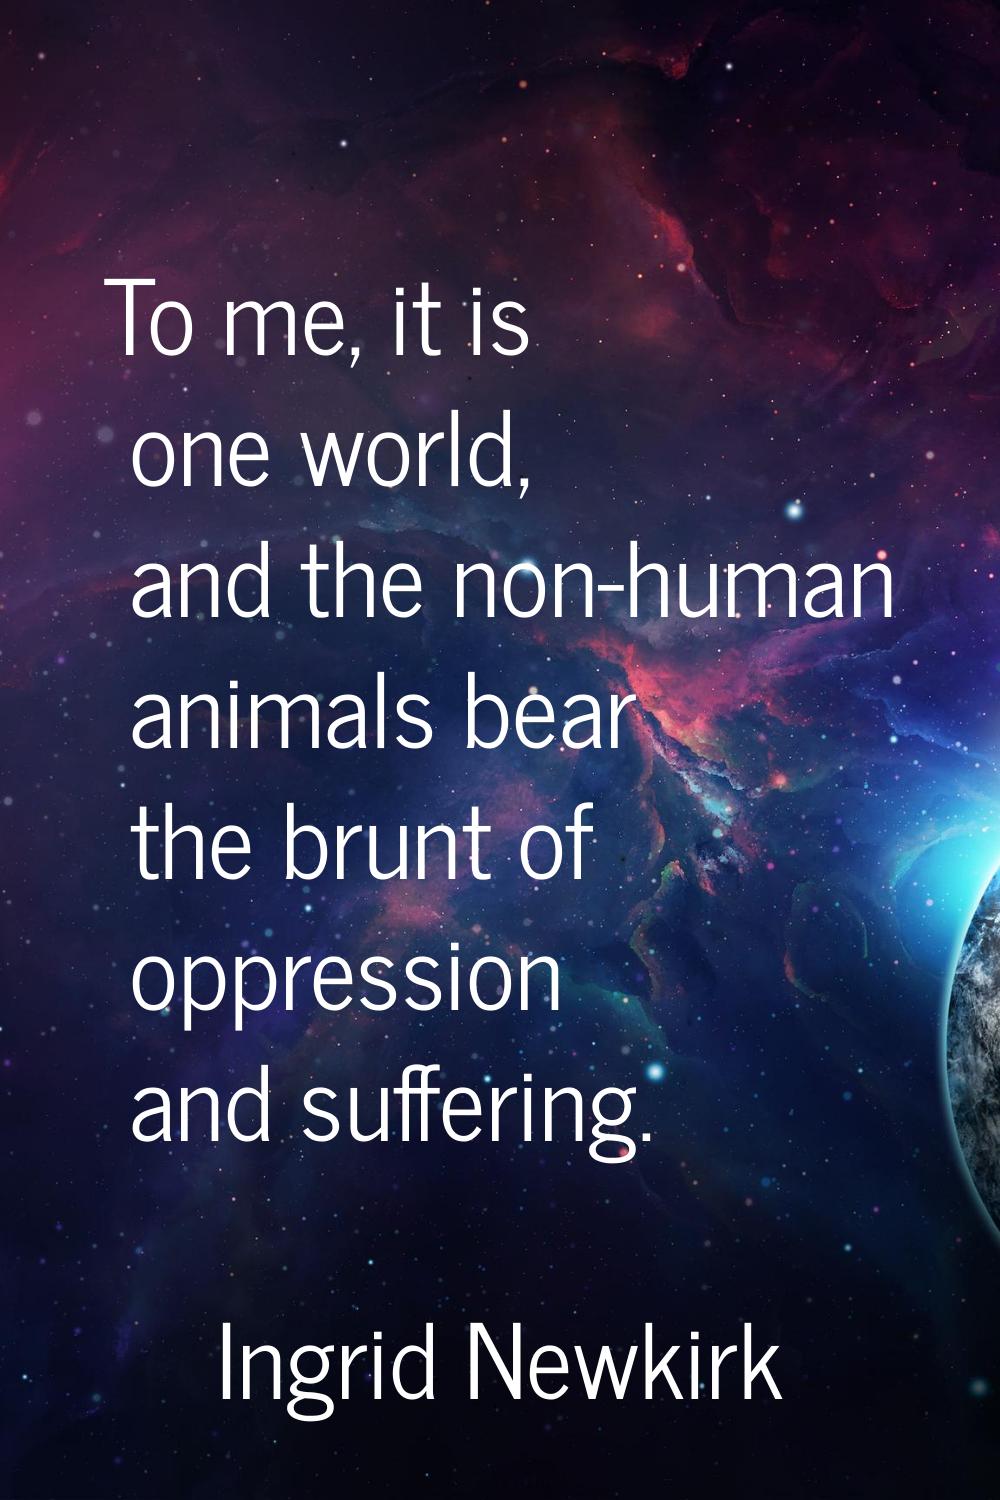 To me, it is one world, and the non-human animals bear the brunt of oppression and suffering.